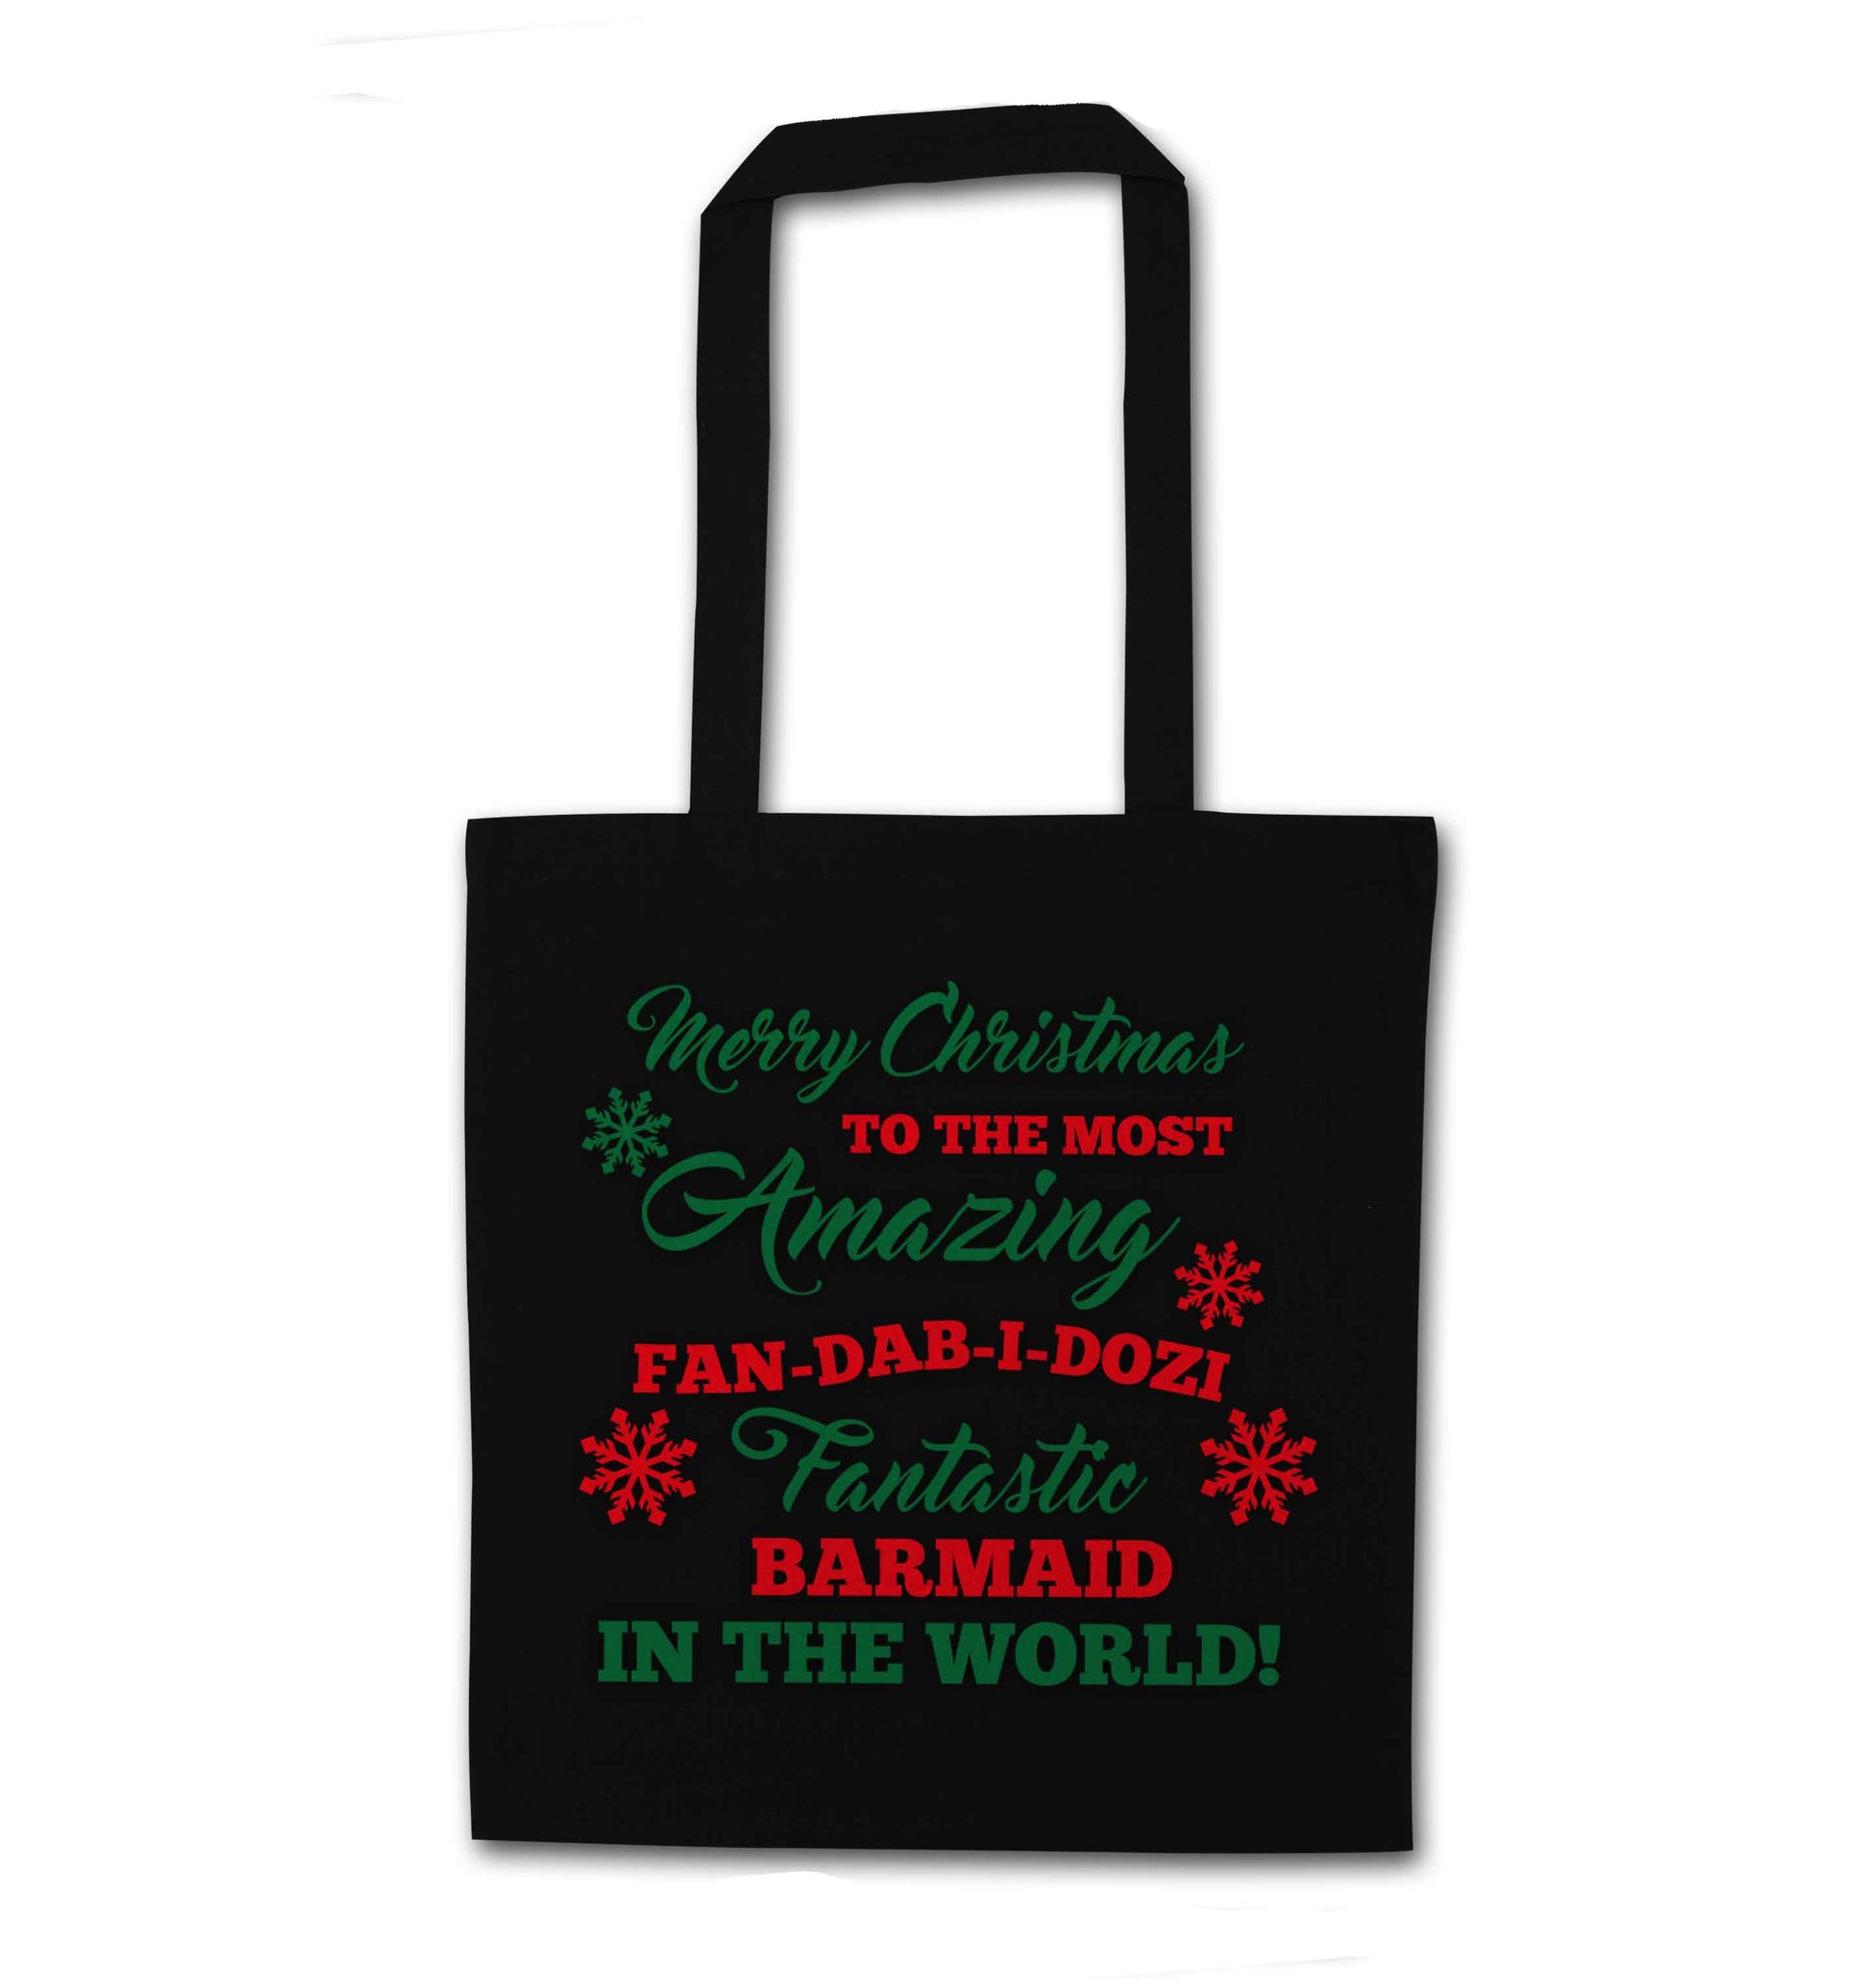 Merry Christmas to the most amazing barmaid in the world! black tote bag